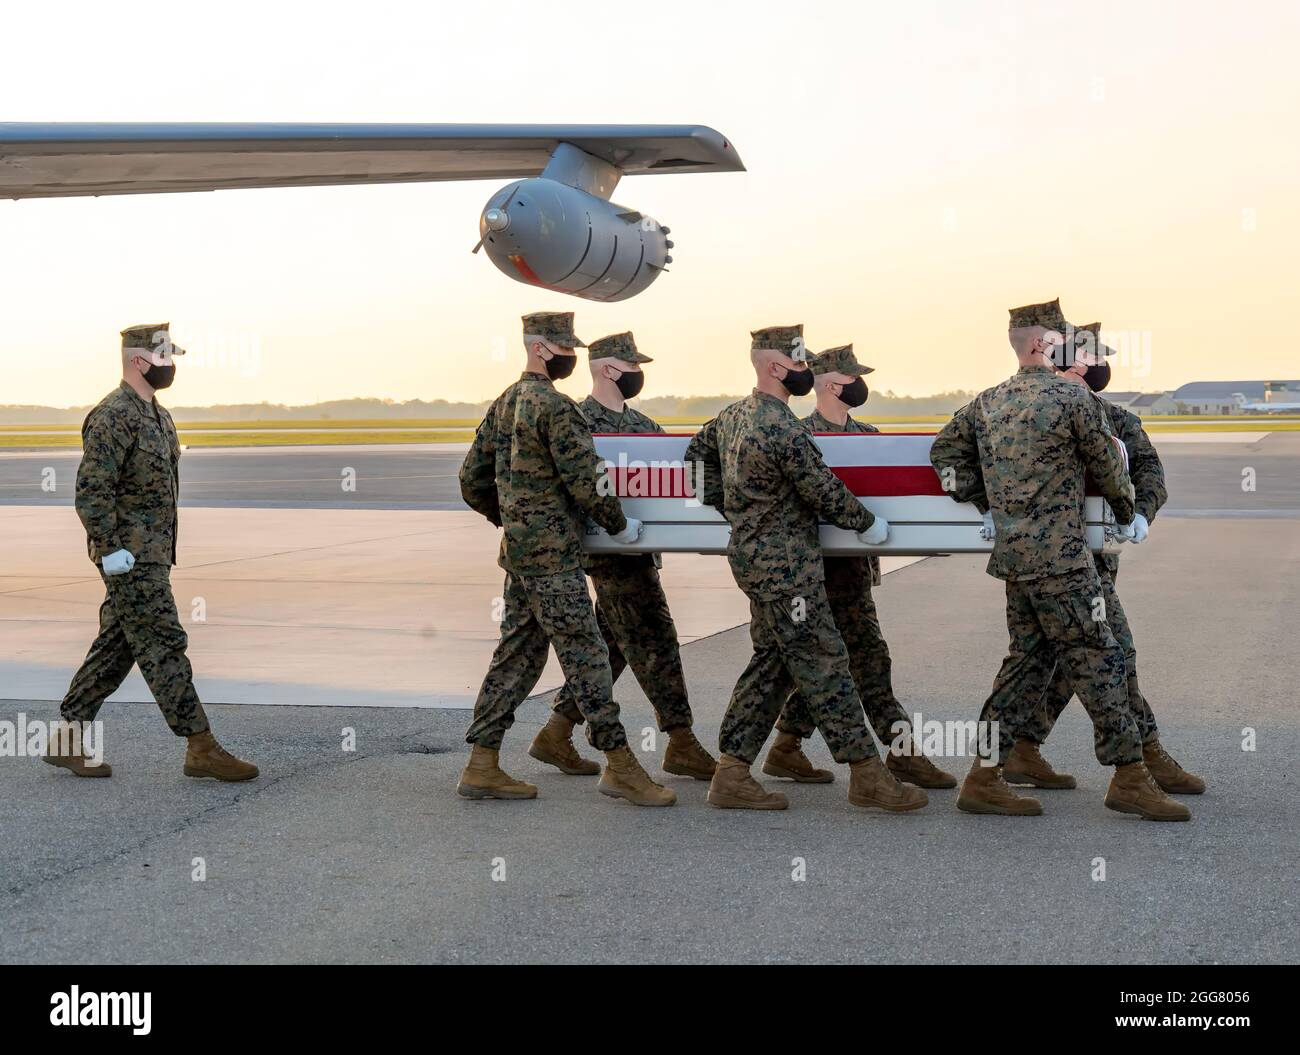 A U.S. Marine Corps carry team transfers the remains of Marine Sgt. Amanda N. Brazeal of Chunchula, Alabama, April 24, 2021 at Dover Air Force Base, Delaware. Brazeal was assigned to Marine Corps Embassy Security Group Region 2, Marine Corps Embassy Security Group Headquarters, Quantico, Virginia. (U.S. Air Force photo by Jason Minto) Stock Photo